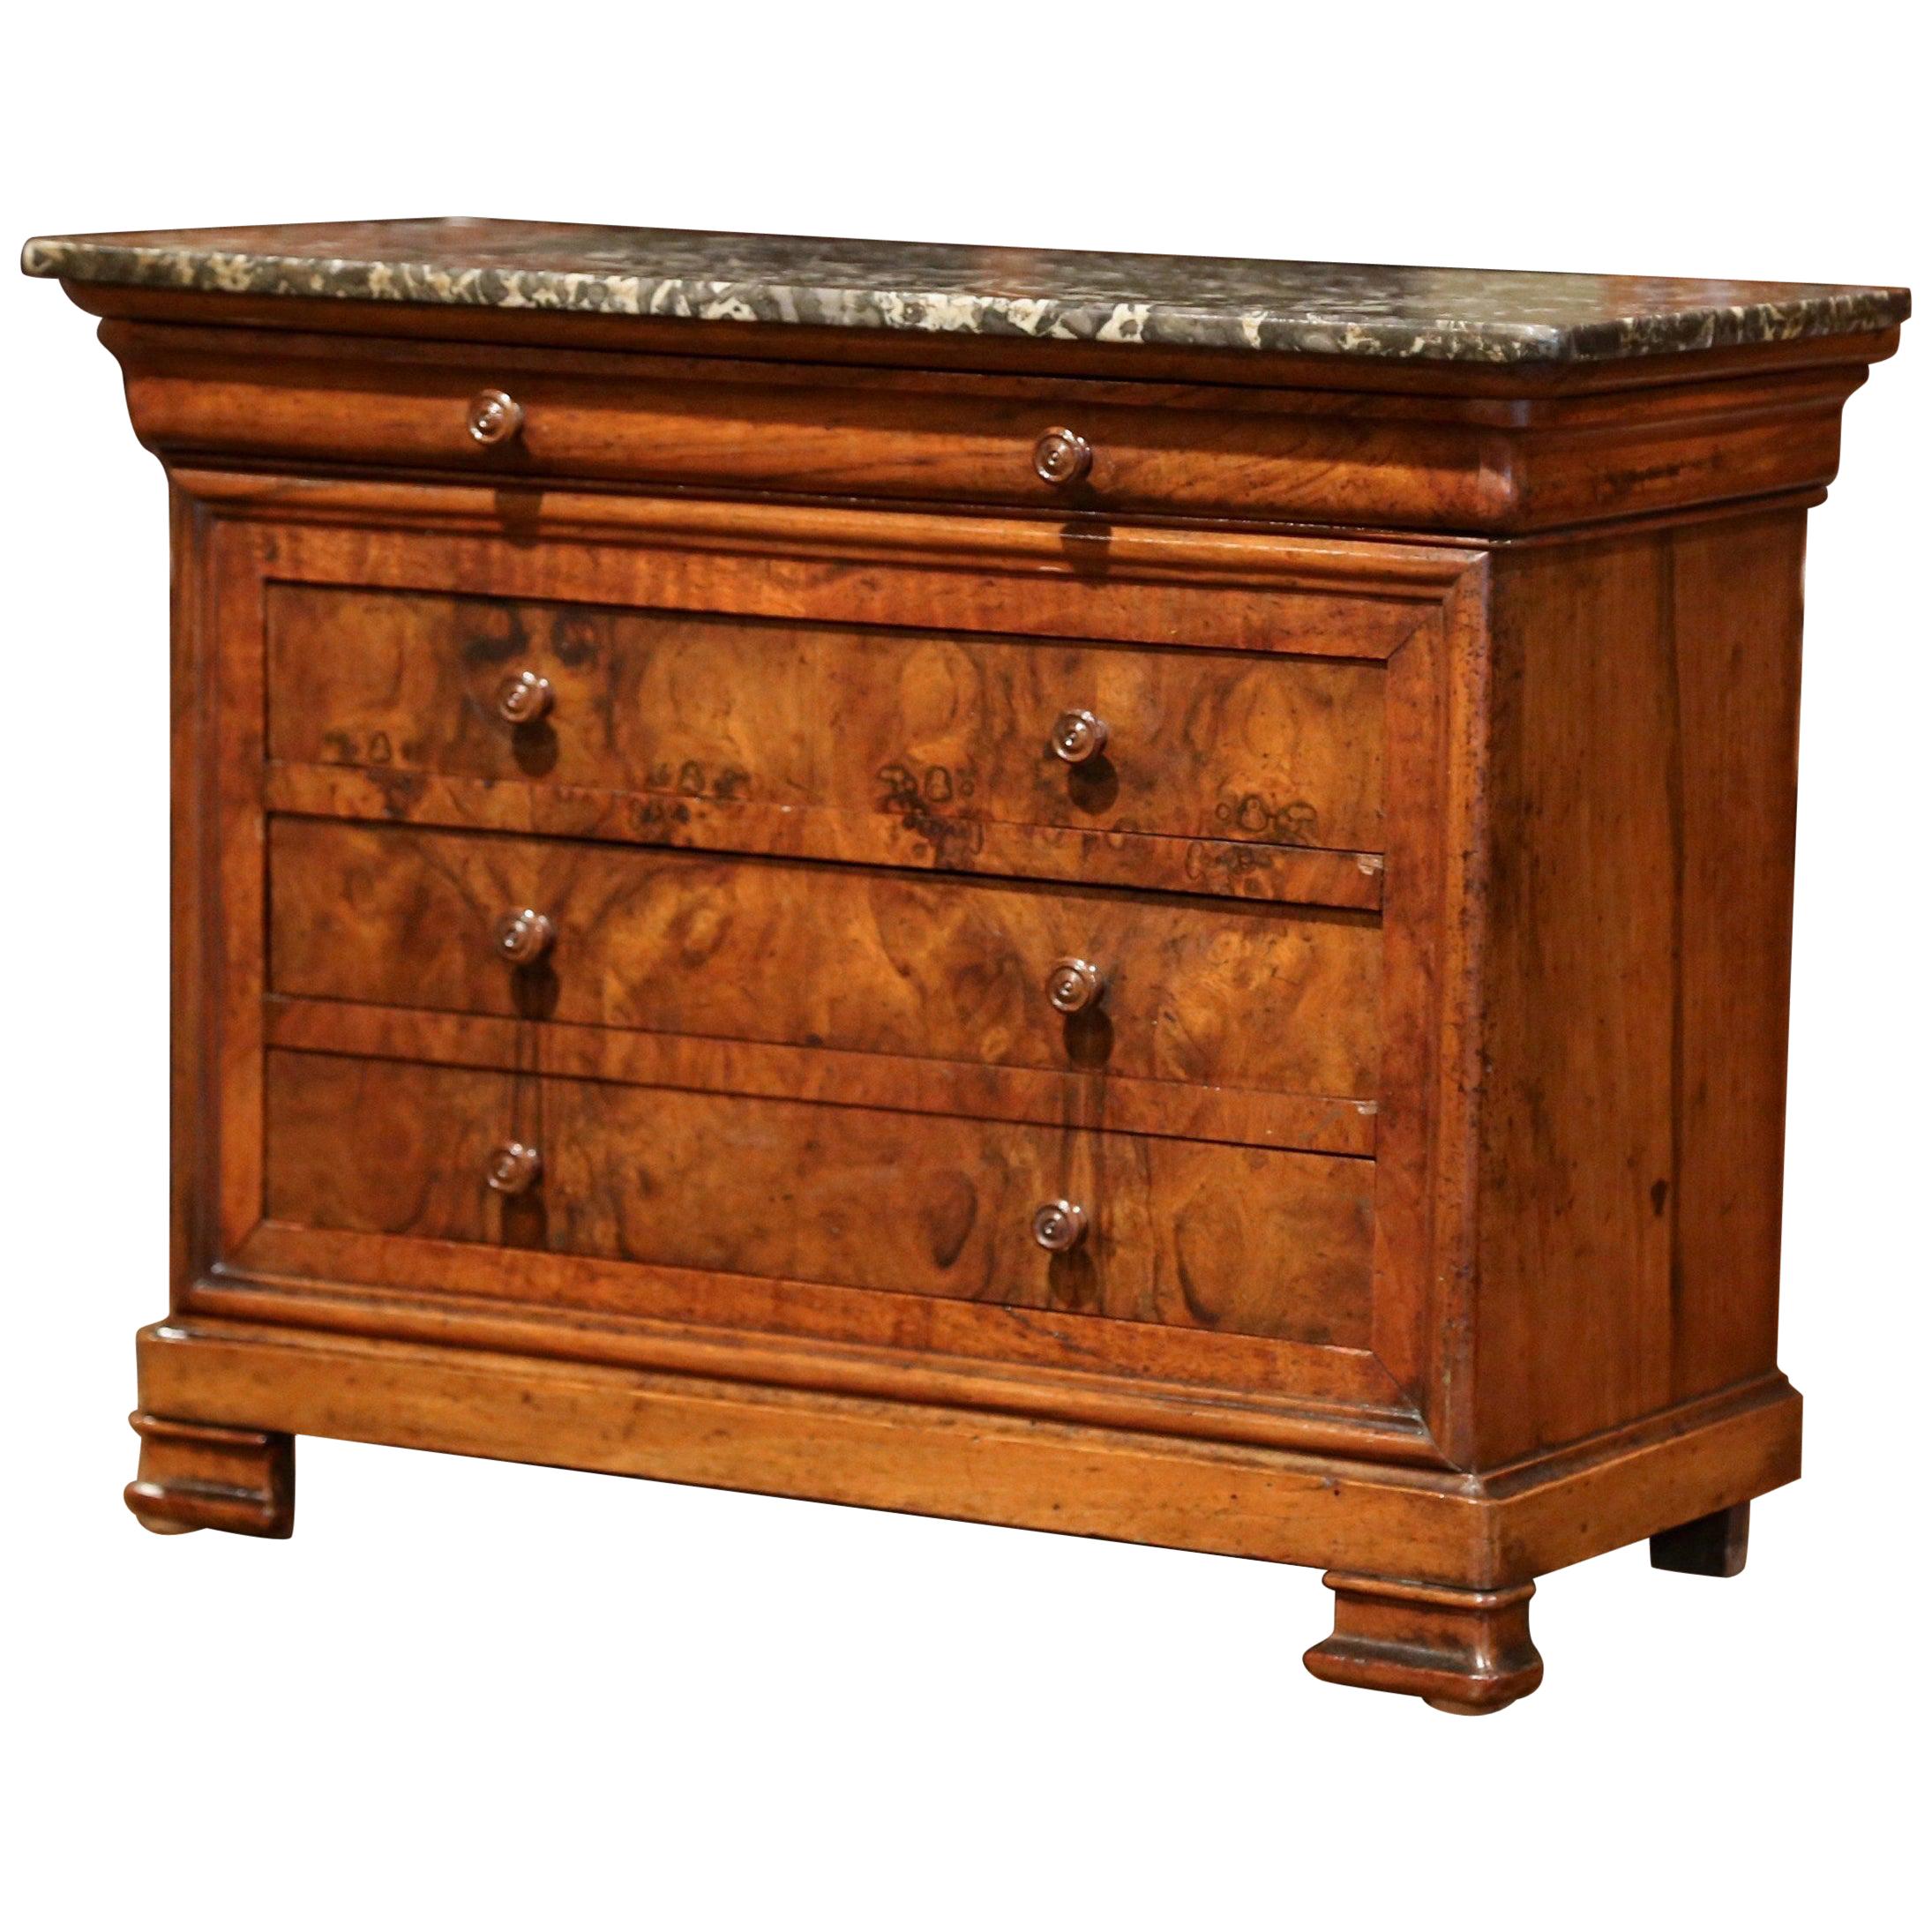 19th Century, French Louis Philippe Walnut Miniature Commode with Marble Top